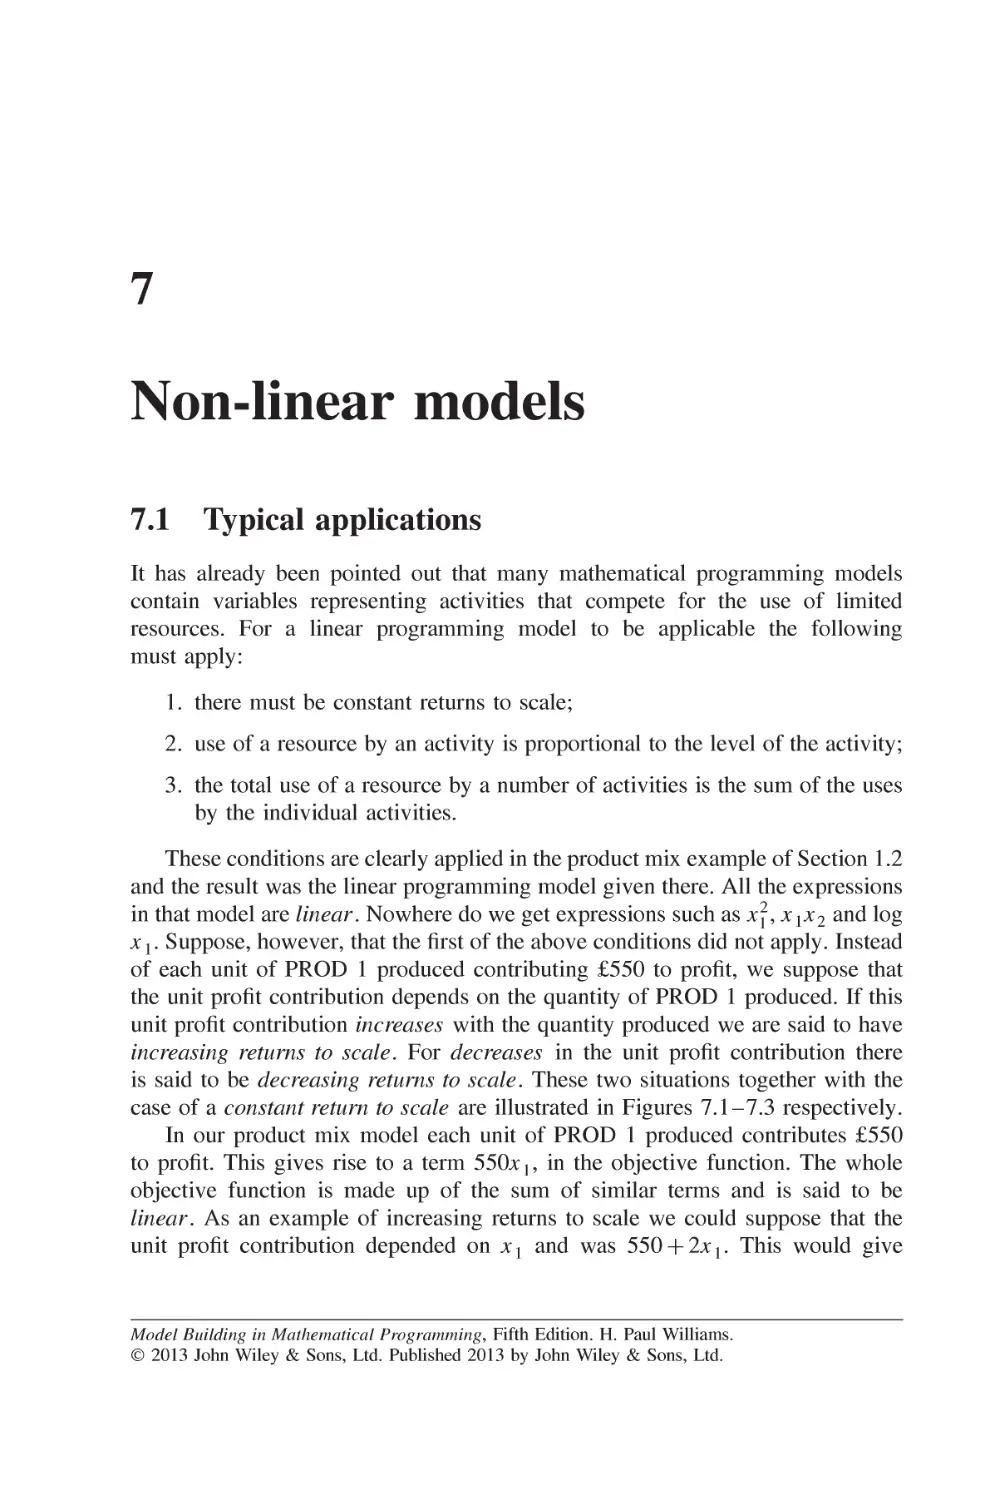 Chapter 7 Non-linear models